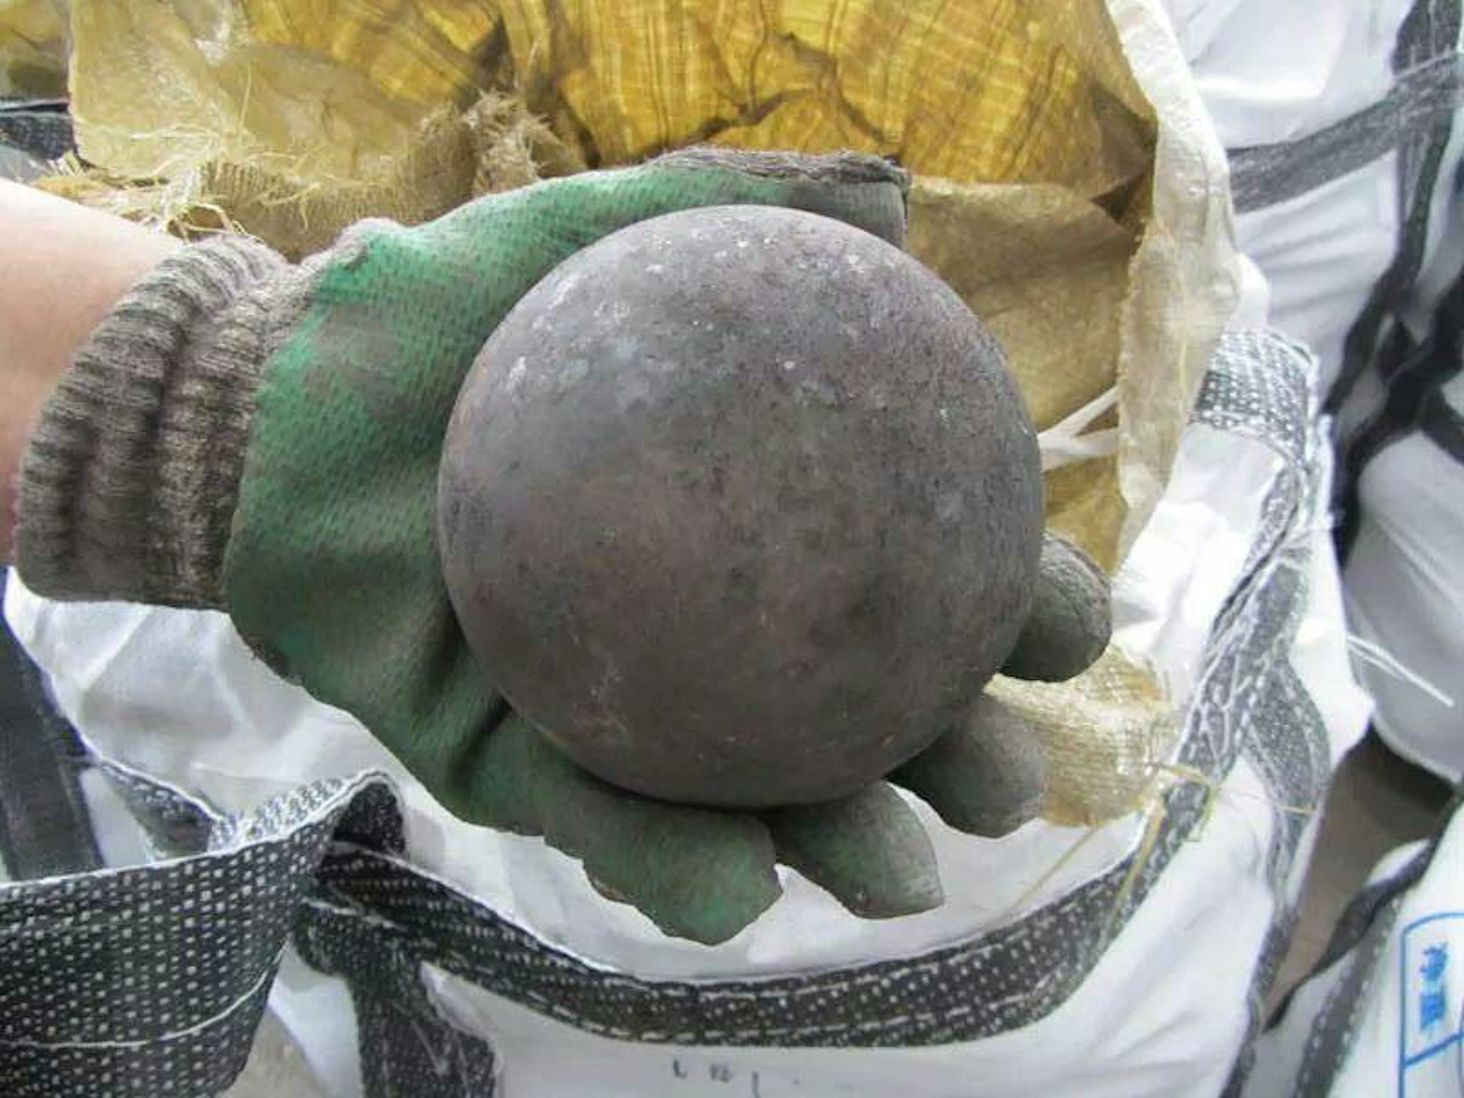 100,000 Units/tons Of Used High Quality, Approximately 3" To 6" Size Forged Steel Grinding Balls)